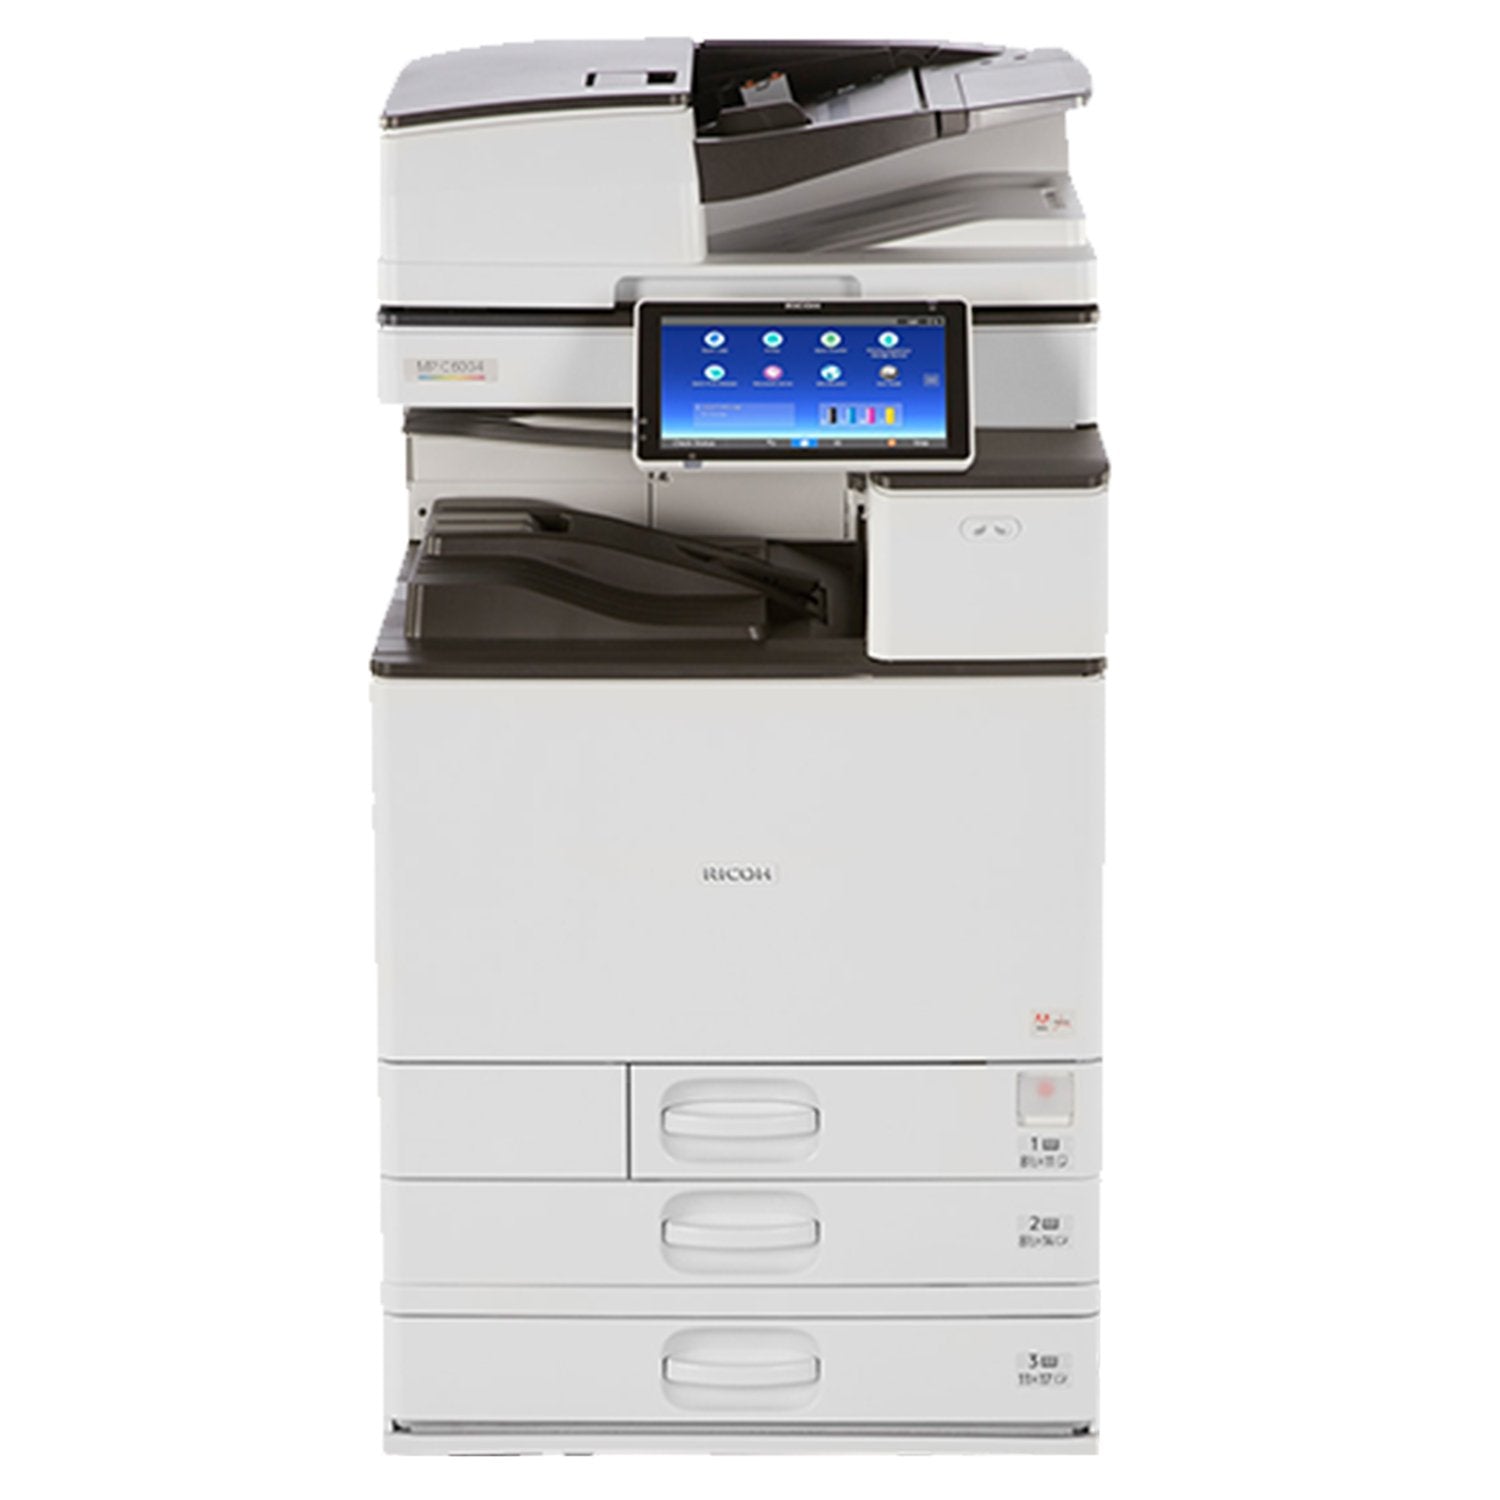 Absolute Toner $69/Month Ricoh MP C6004 60PPM Color Laser Multifunction Printer Copier Scanner Fax 11X17, 12x18 With 1200 x 1200 Dpi Print Resolution For Office Use Showroom Color Copiers